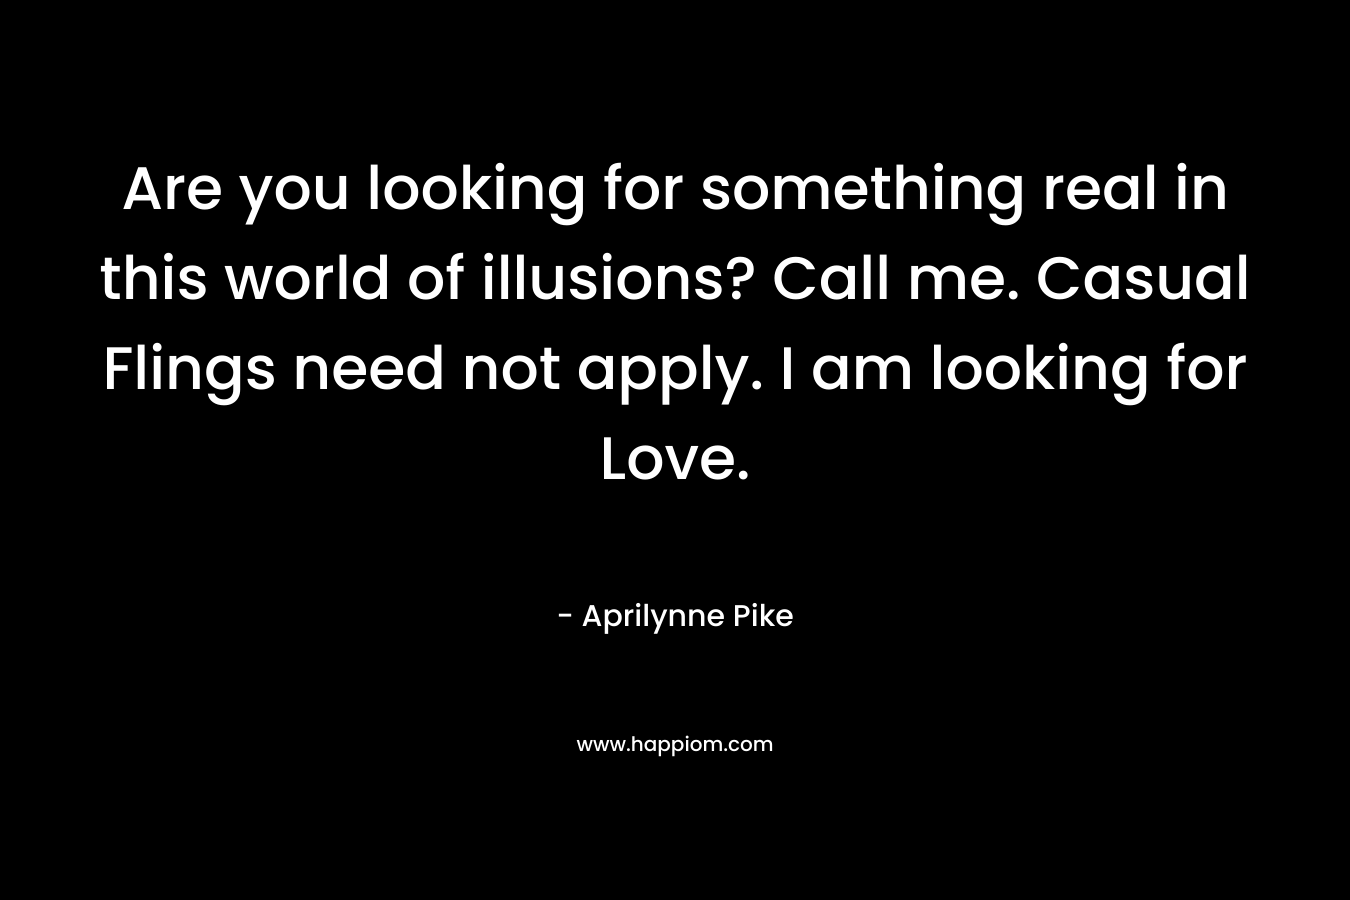 Are you looking for something real in this world of illusions? Call me. Casual Flings need not apply. I am looking for Love.